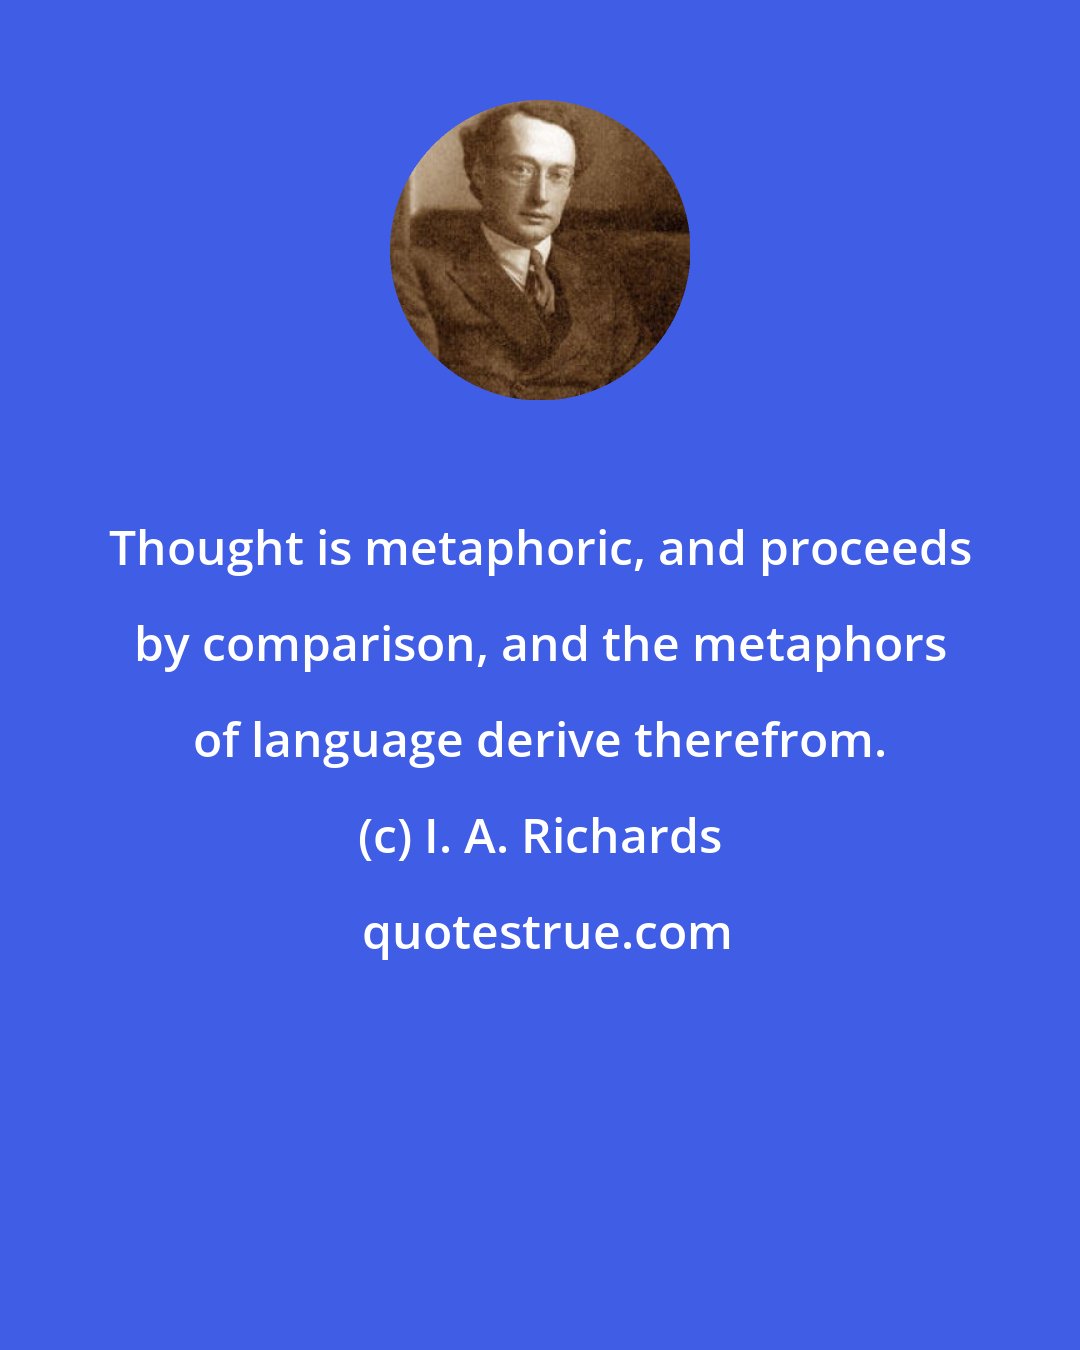 I. A. Richards: Thought is metaphoric, and proceeds by comparison, and the metaphors of language derive therefrom.